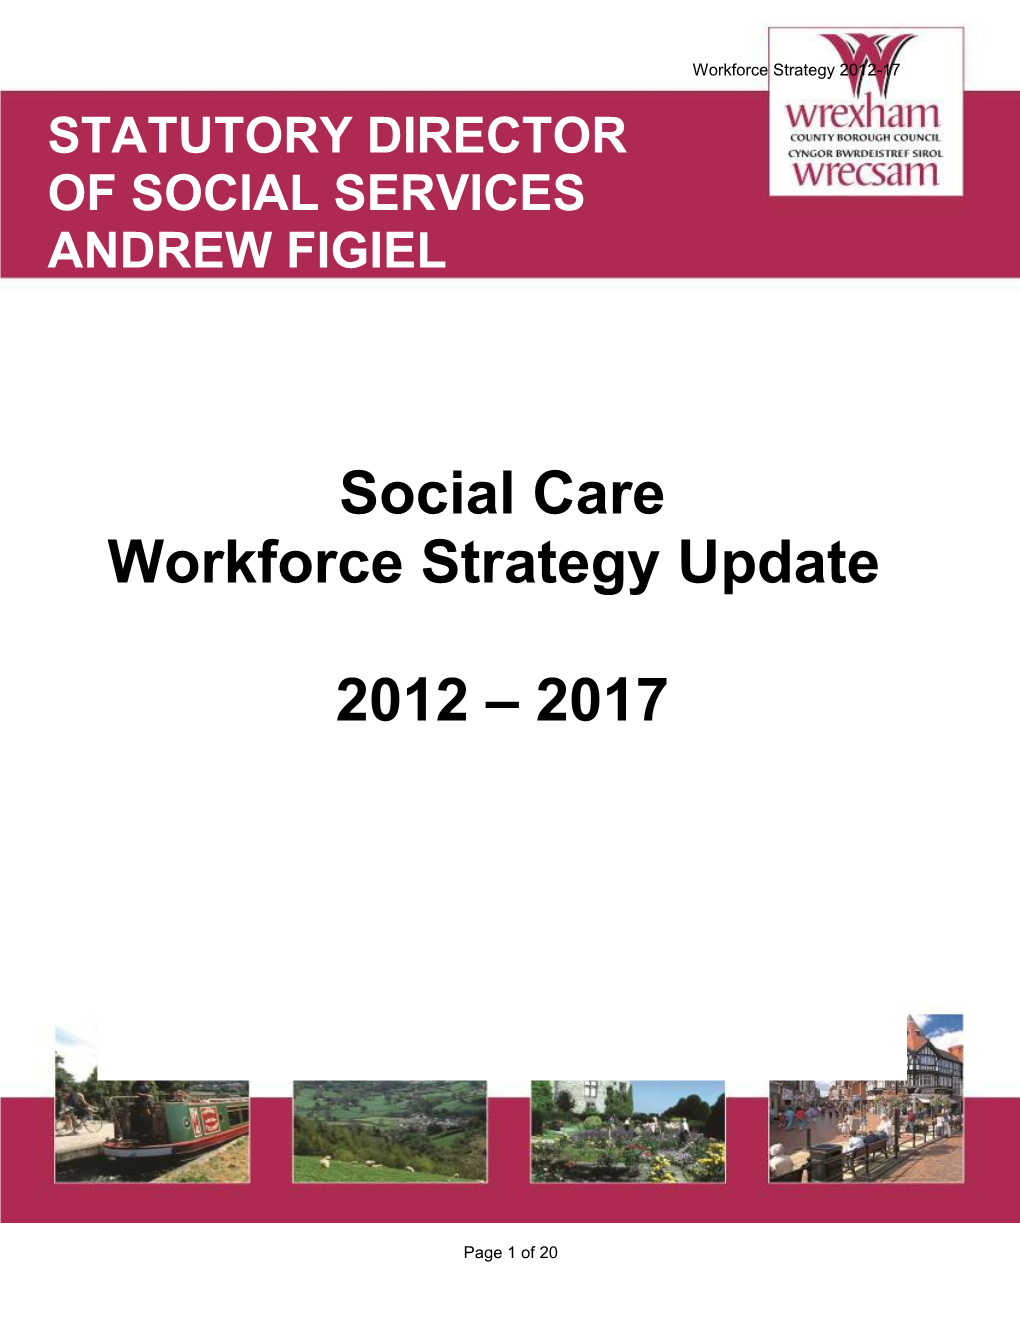 This Document Has Been Produced by Workforce Strategy and Development